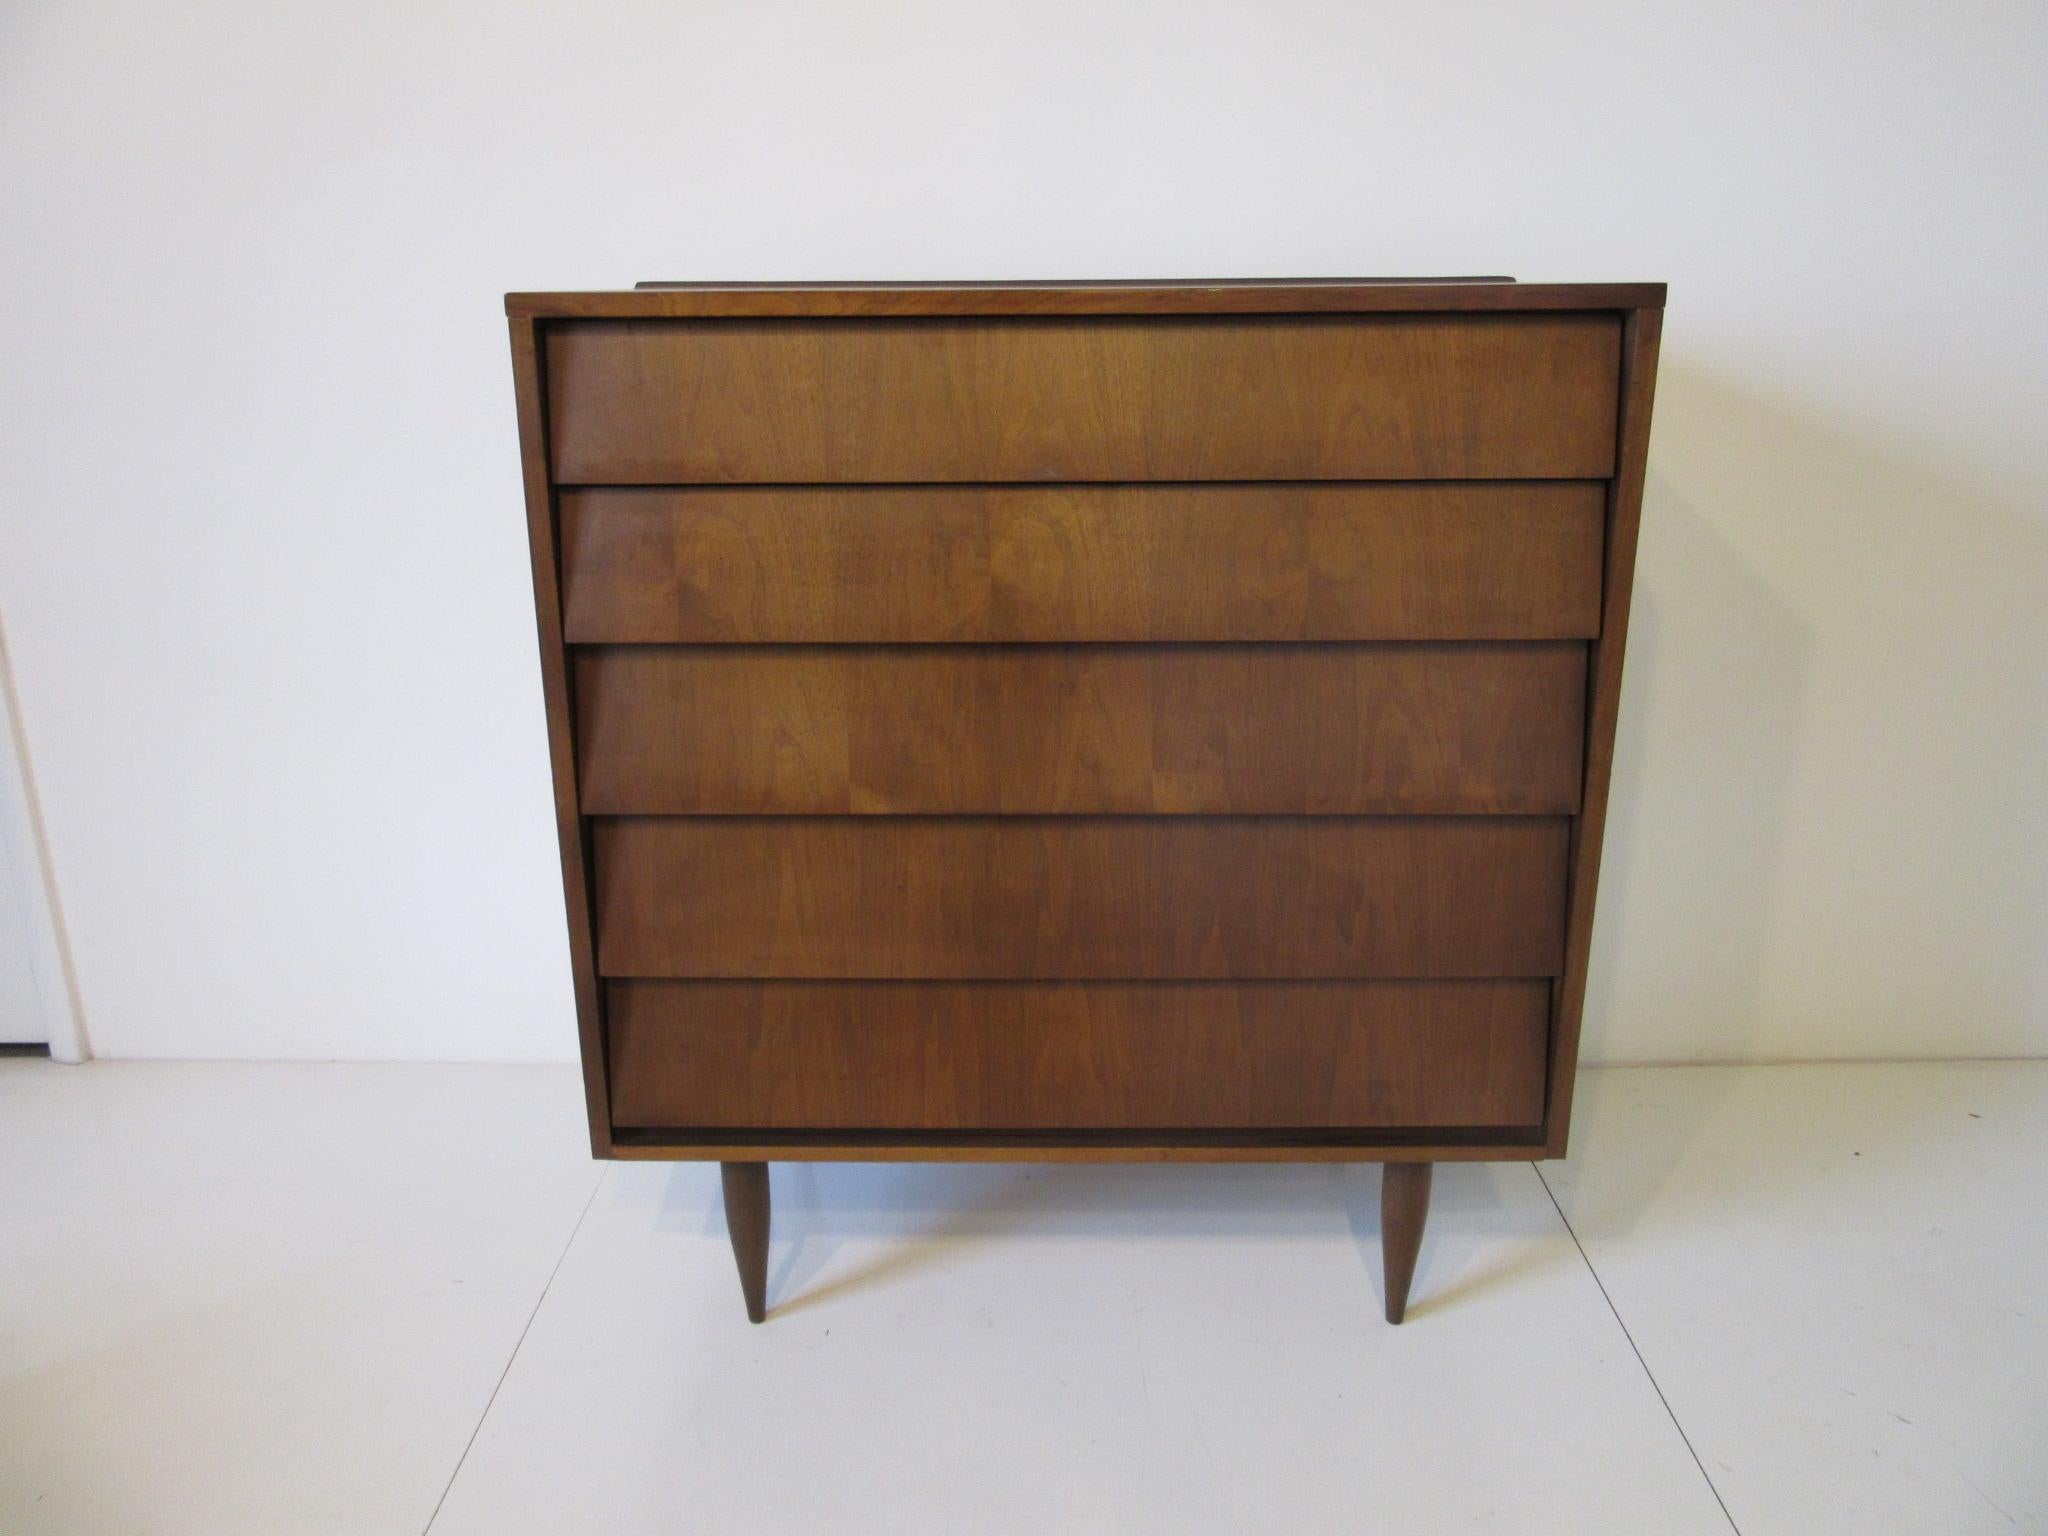 A tall dark walnut dresser chest with five slanted drawer fronts, raised lipped edge to
the back of the top all sitting on conical legs. A great Mid Century look in the manner of Florence Knoll.